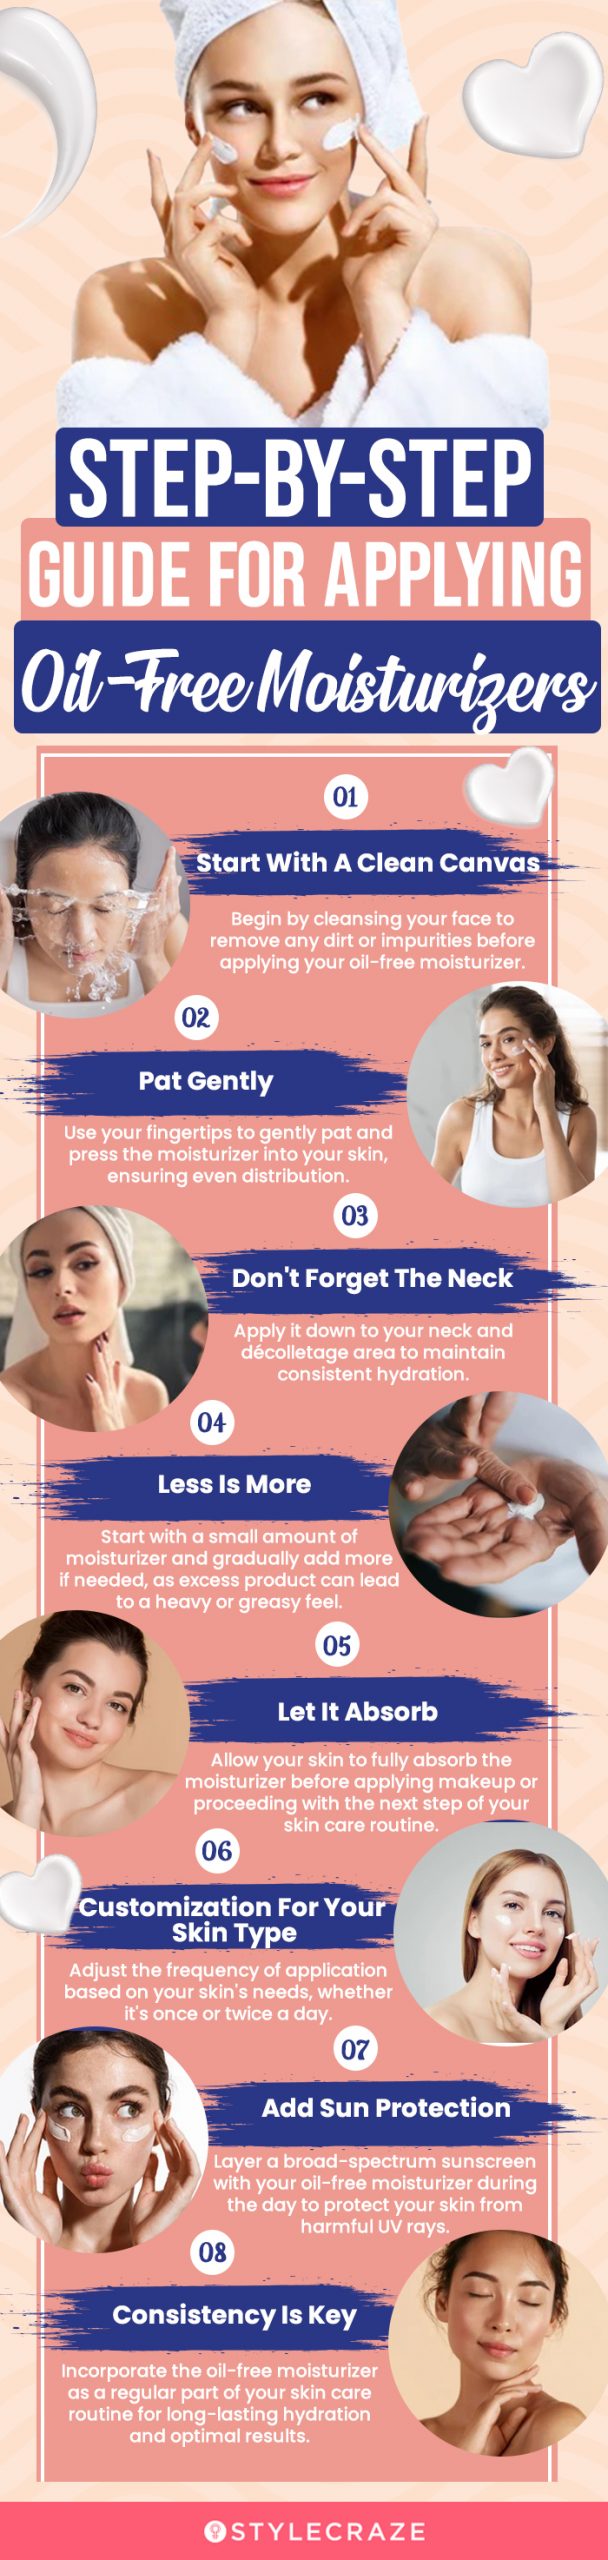 Step-By-Step Guide For Applying Oil-Free Moisturizers (infographic)